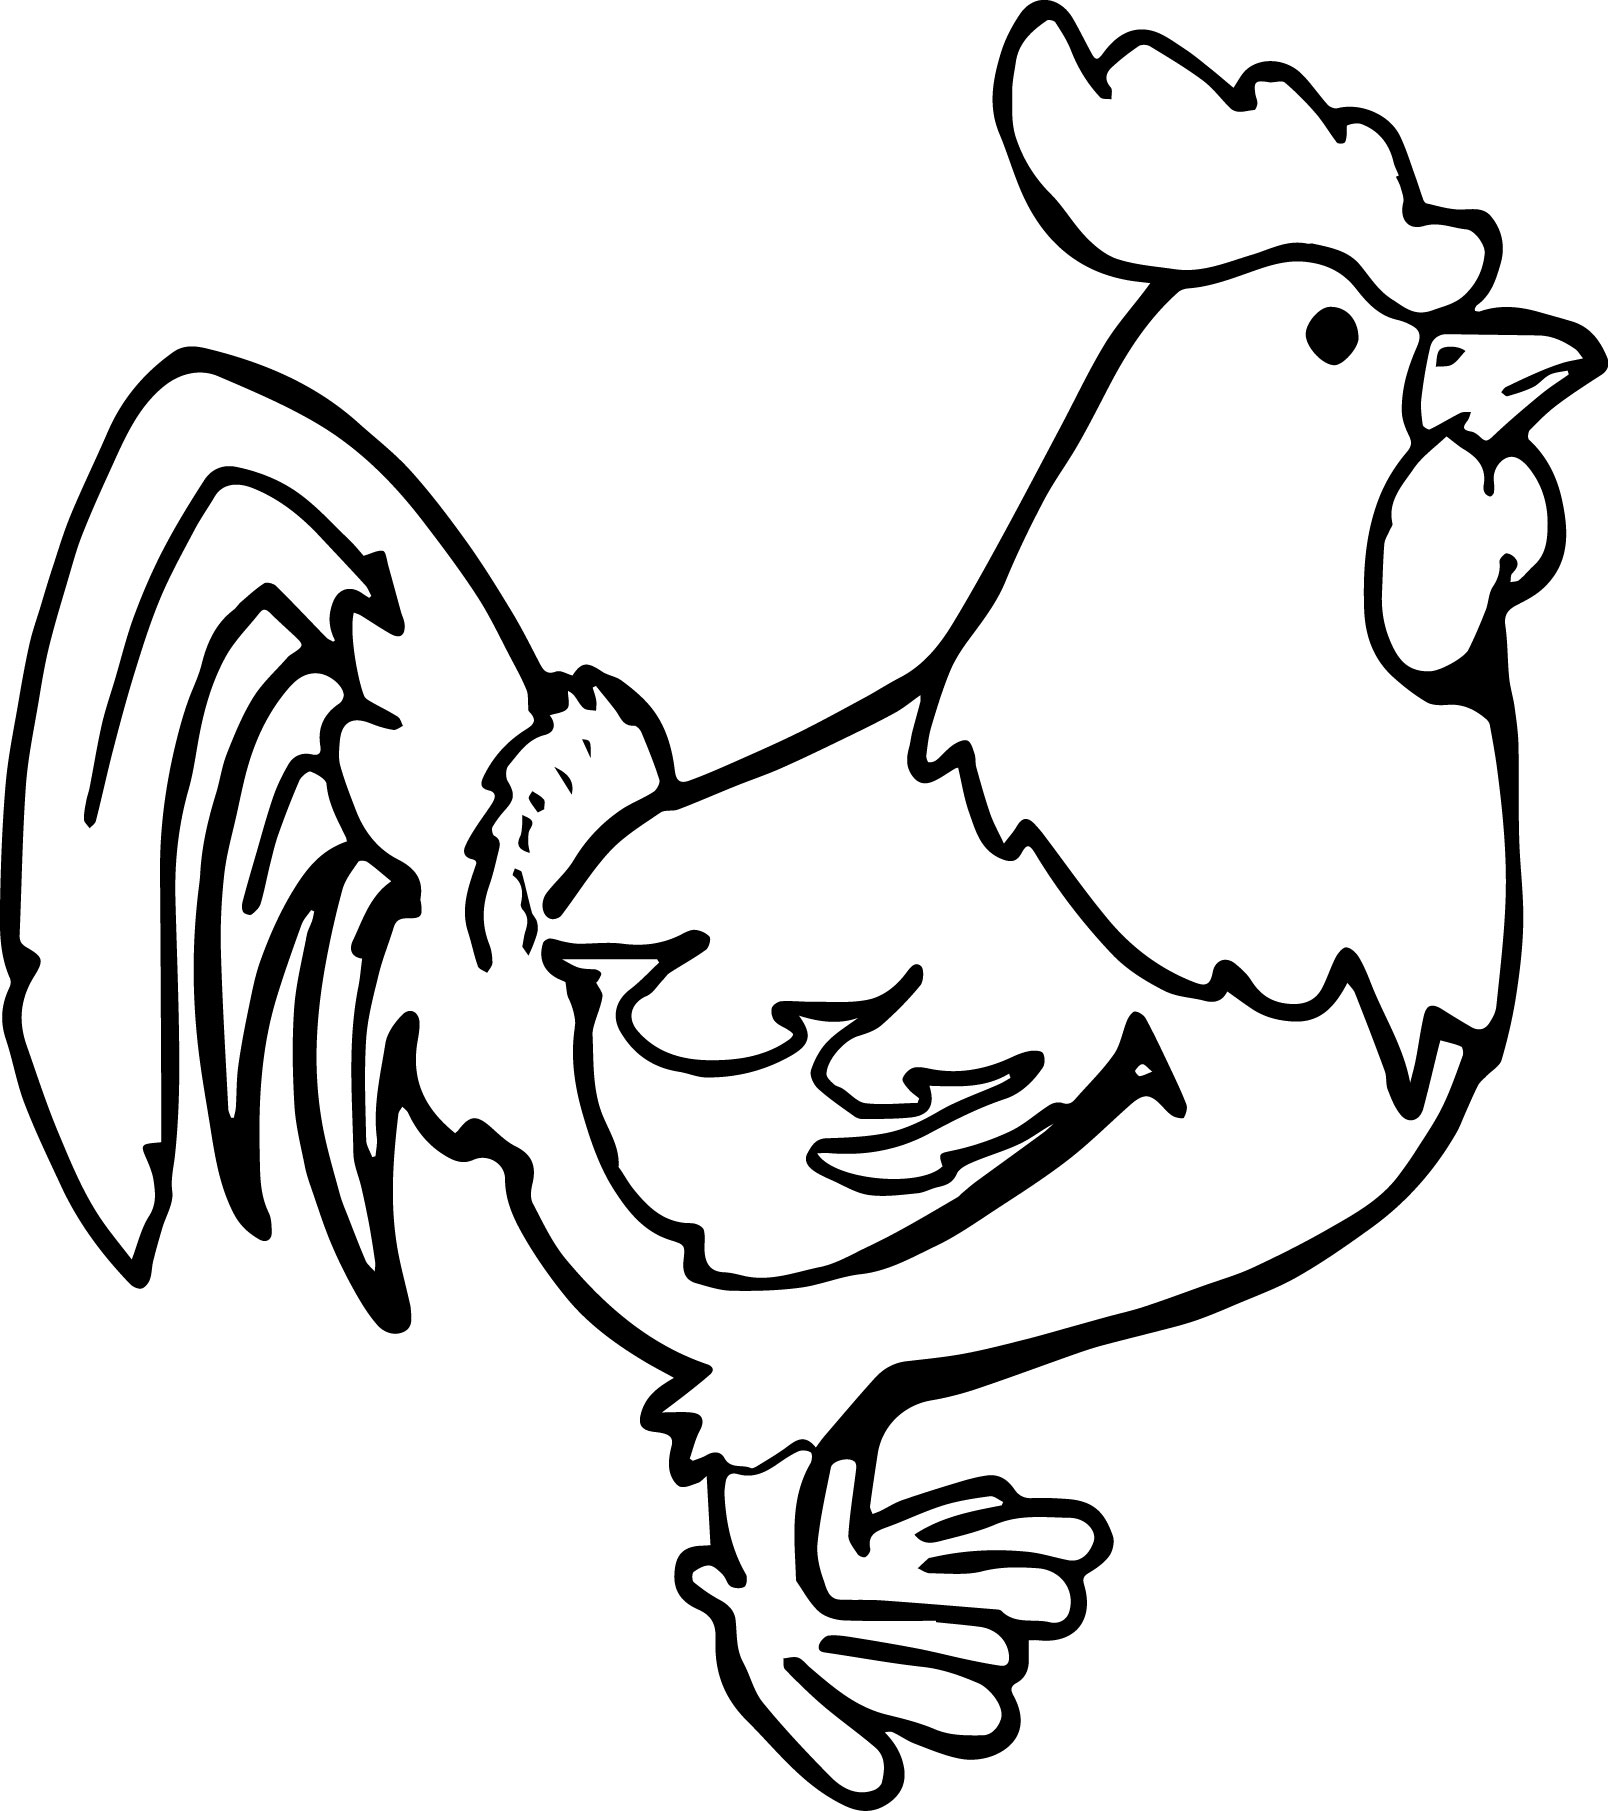 Printable Chicken Coloring Pages - Free Printable Chicken Coloring Page